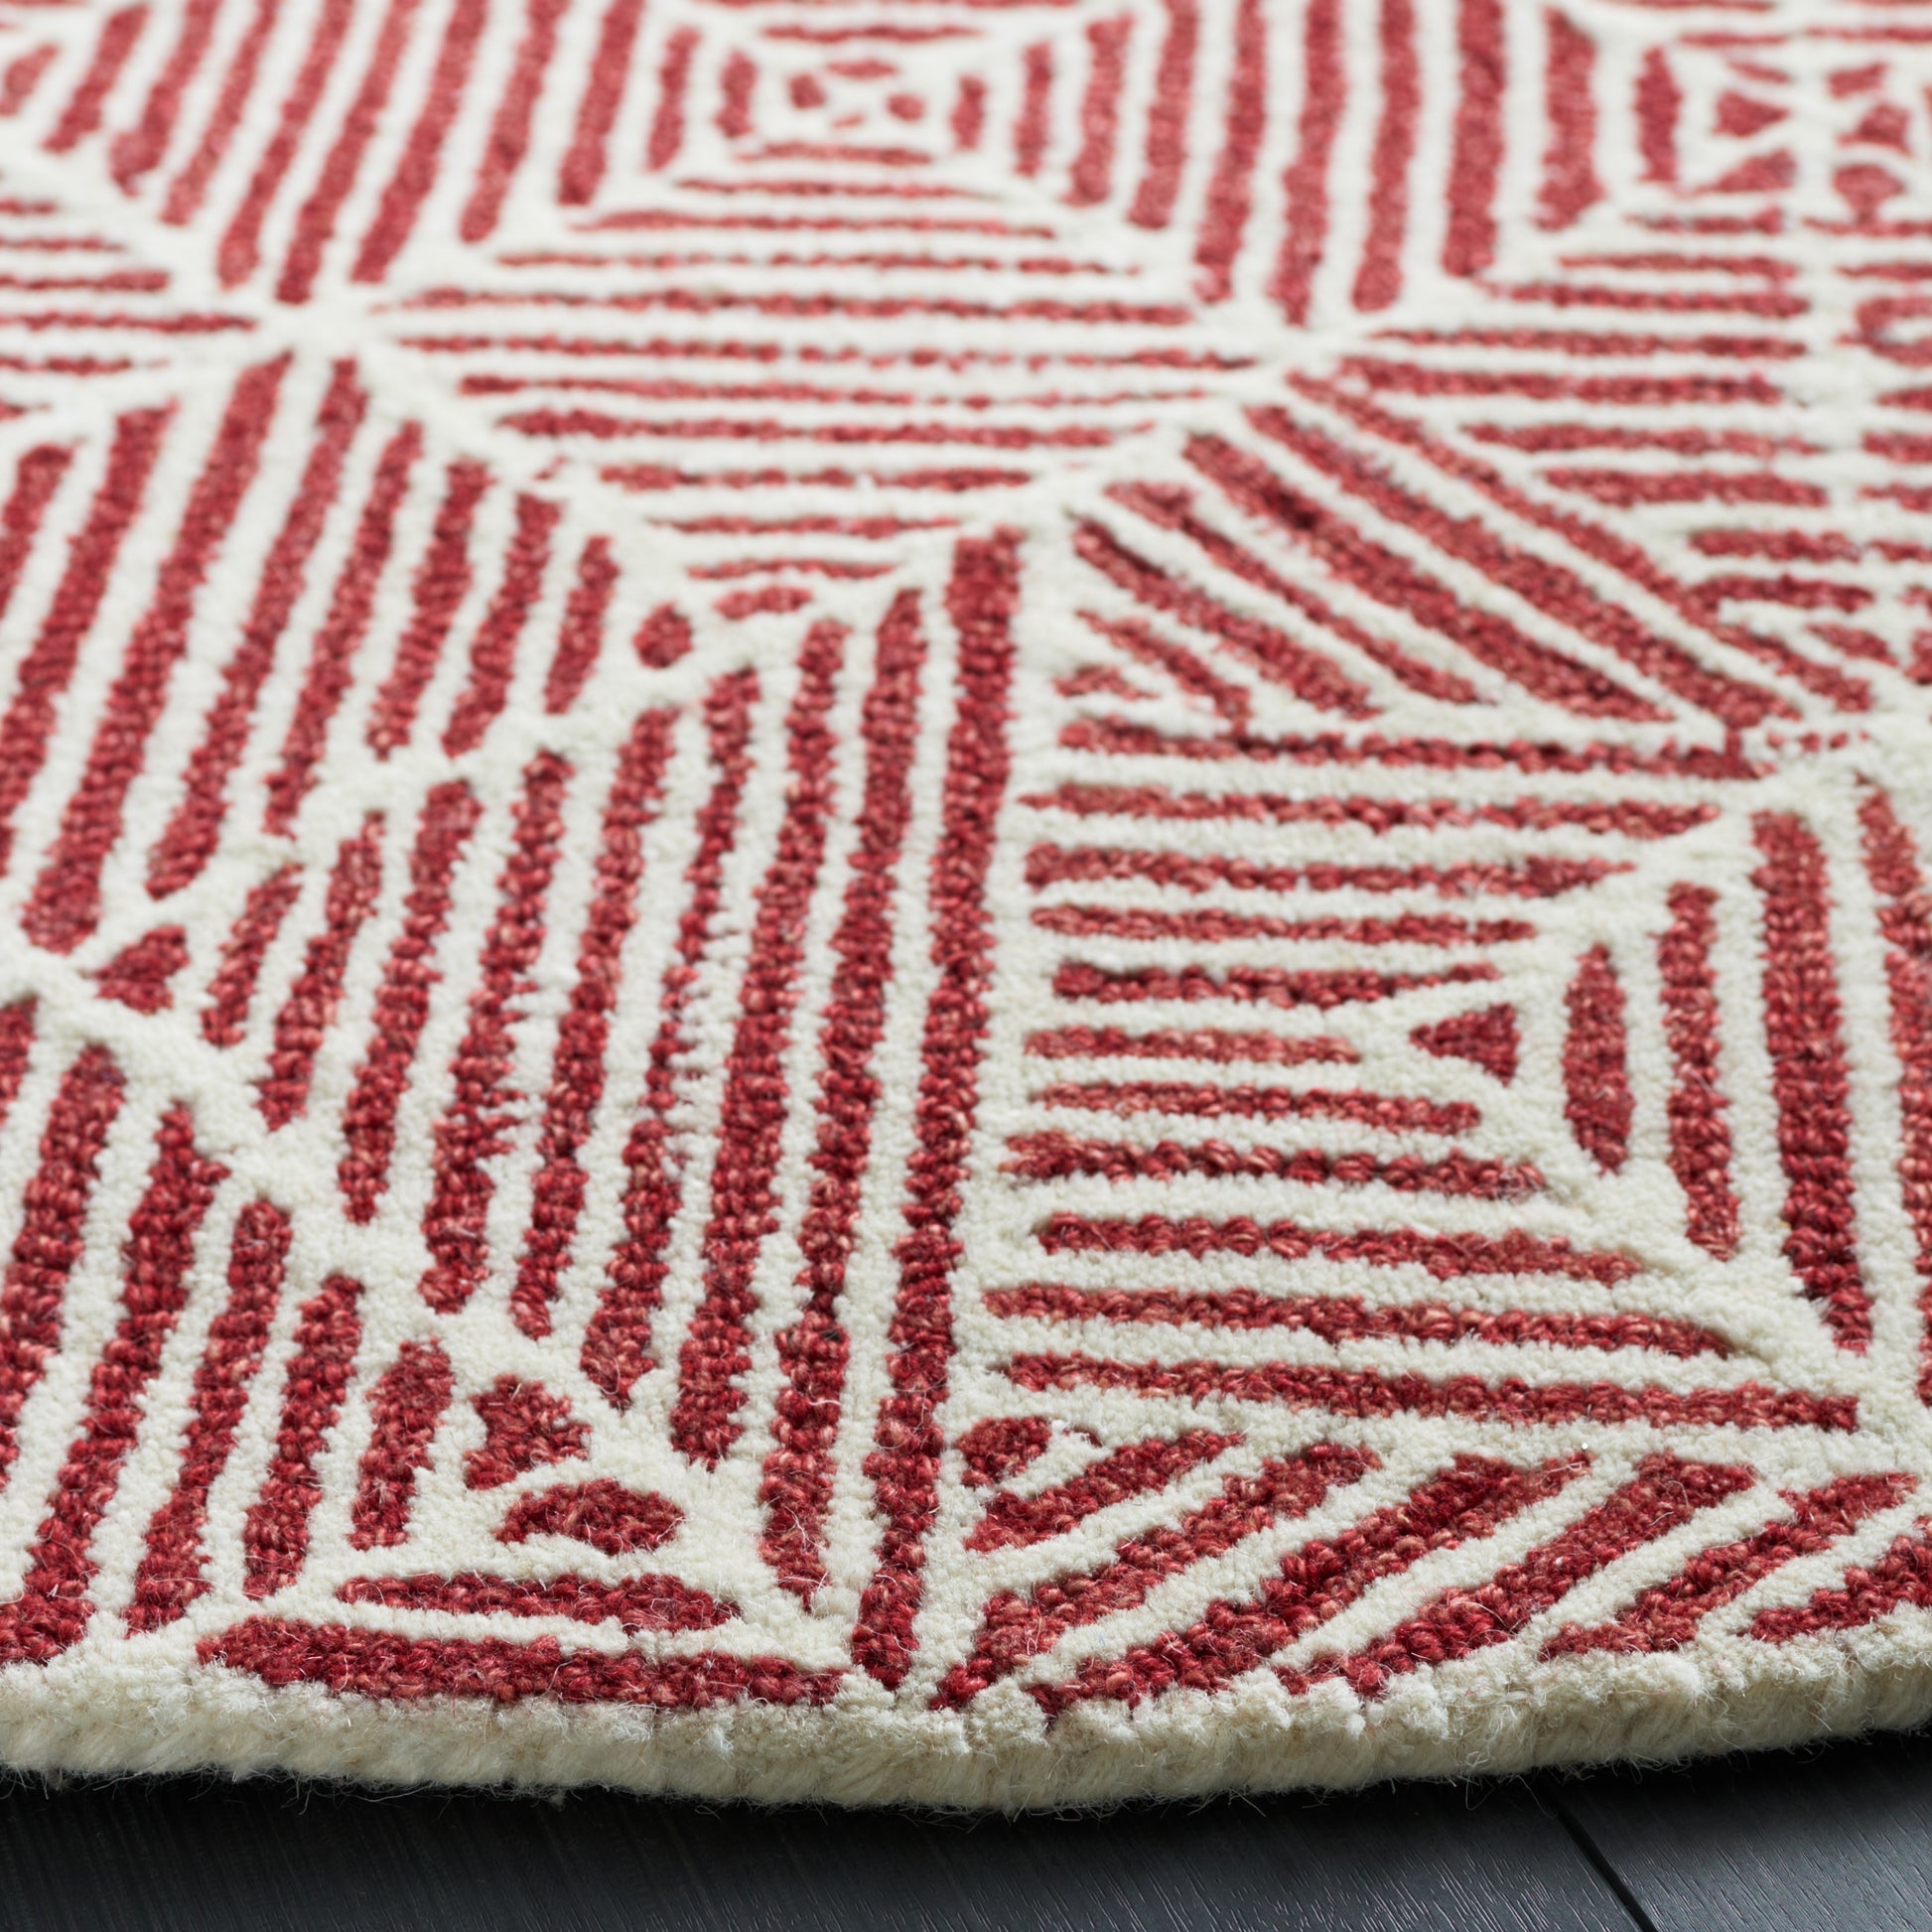 Safavieh Abstract Abt763Q Red/Ivory Area Rug